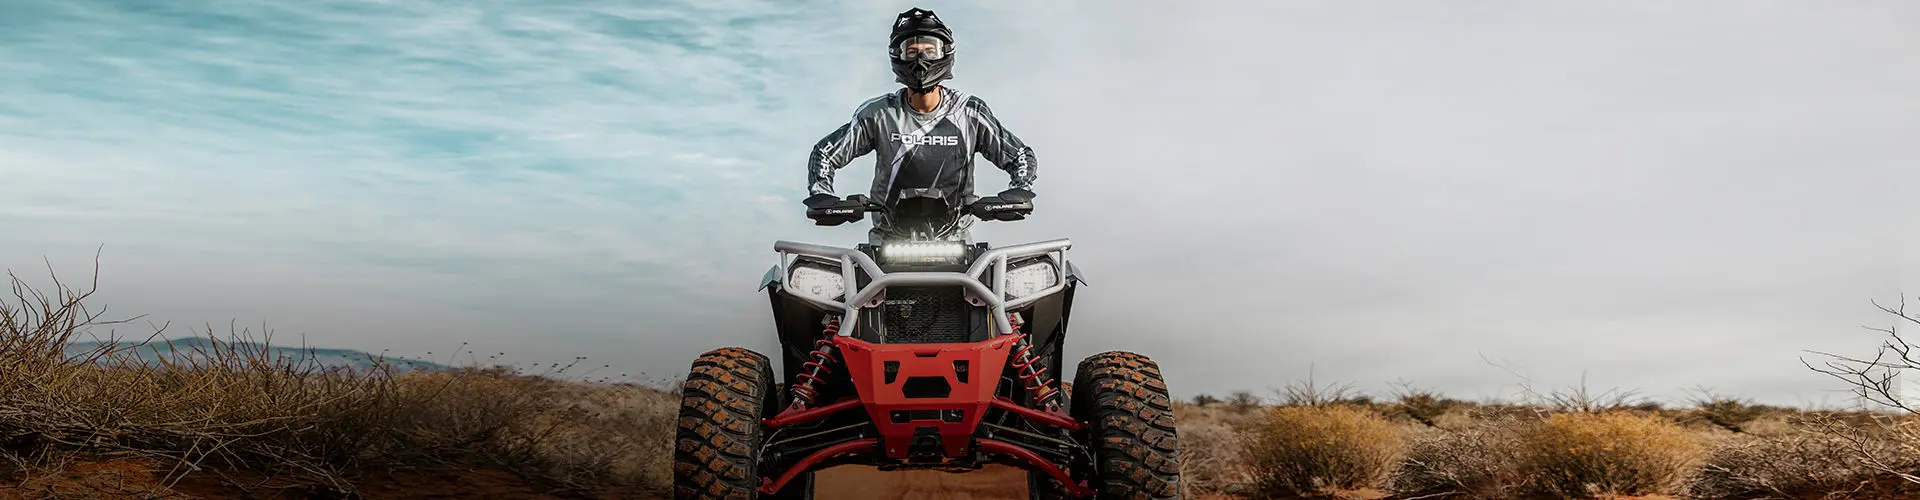 ATV Clothing For a Comfortable Ride